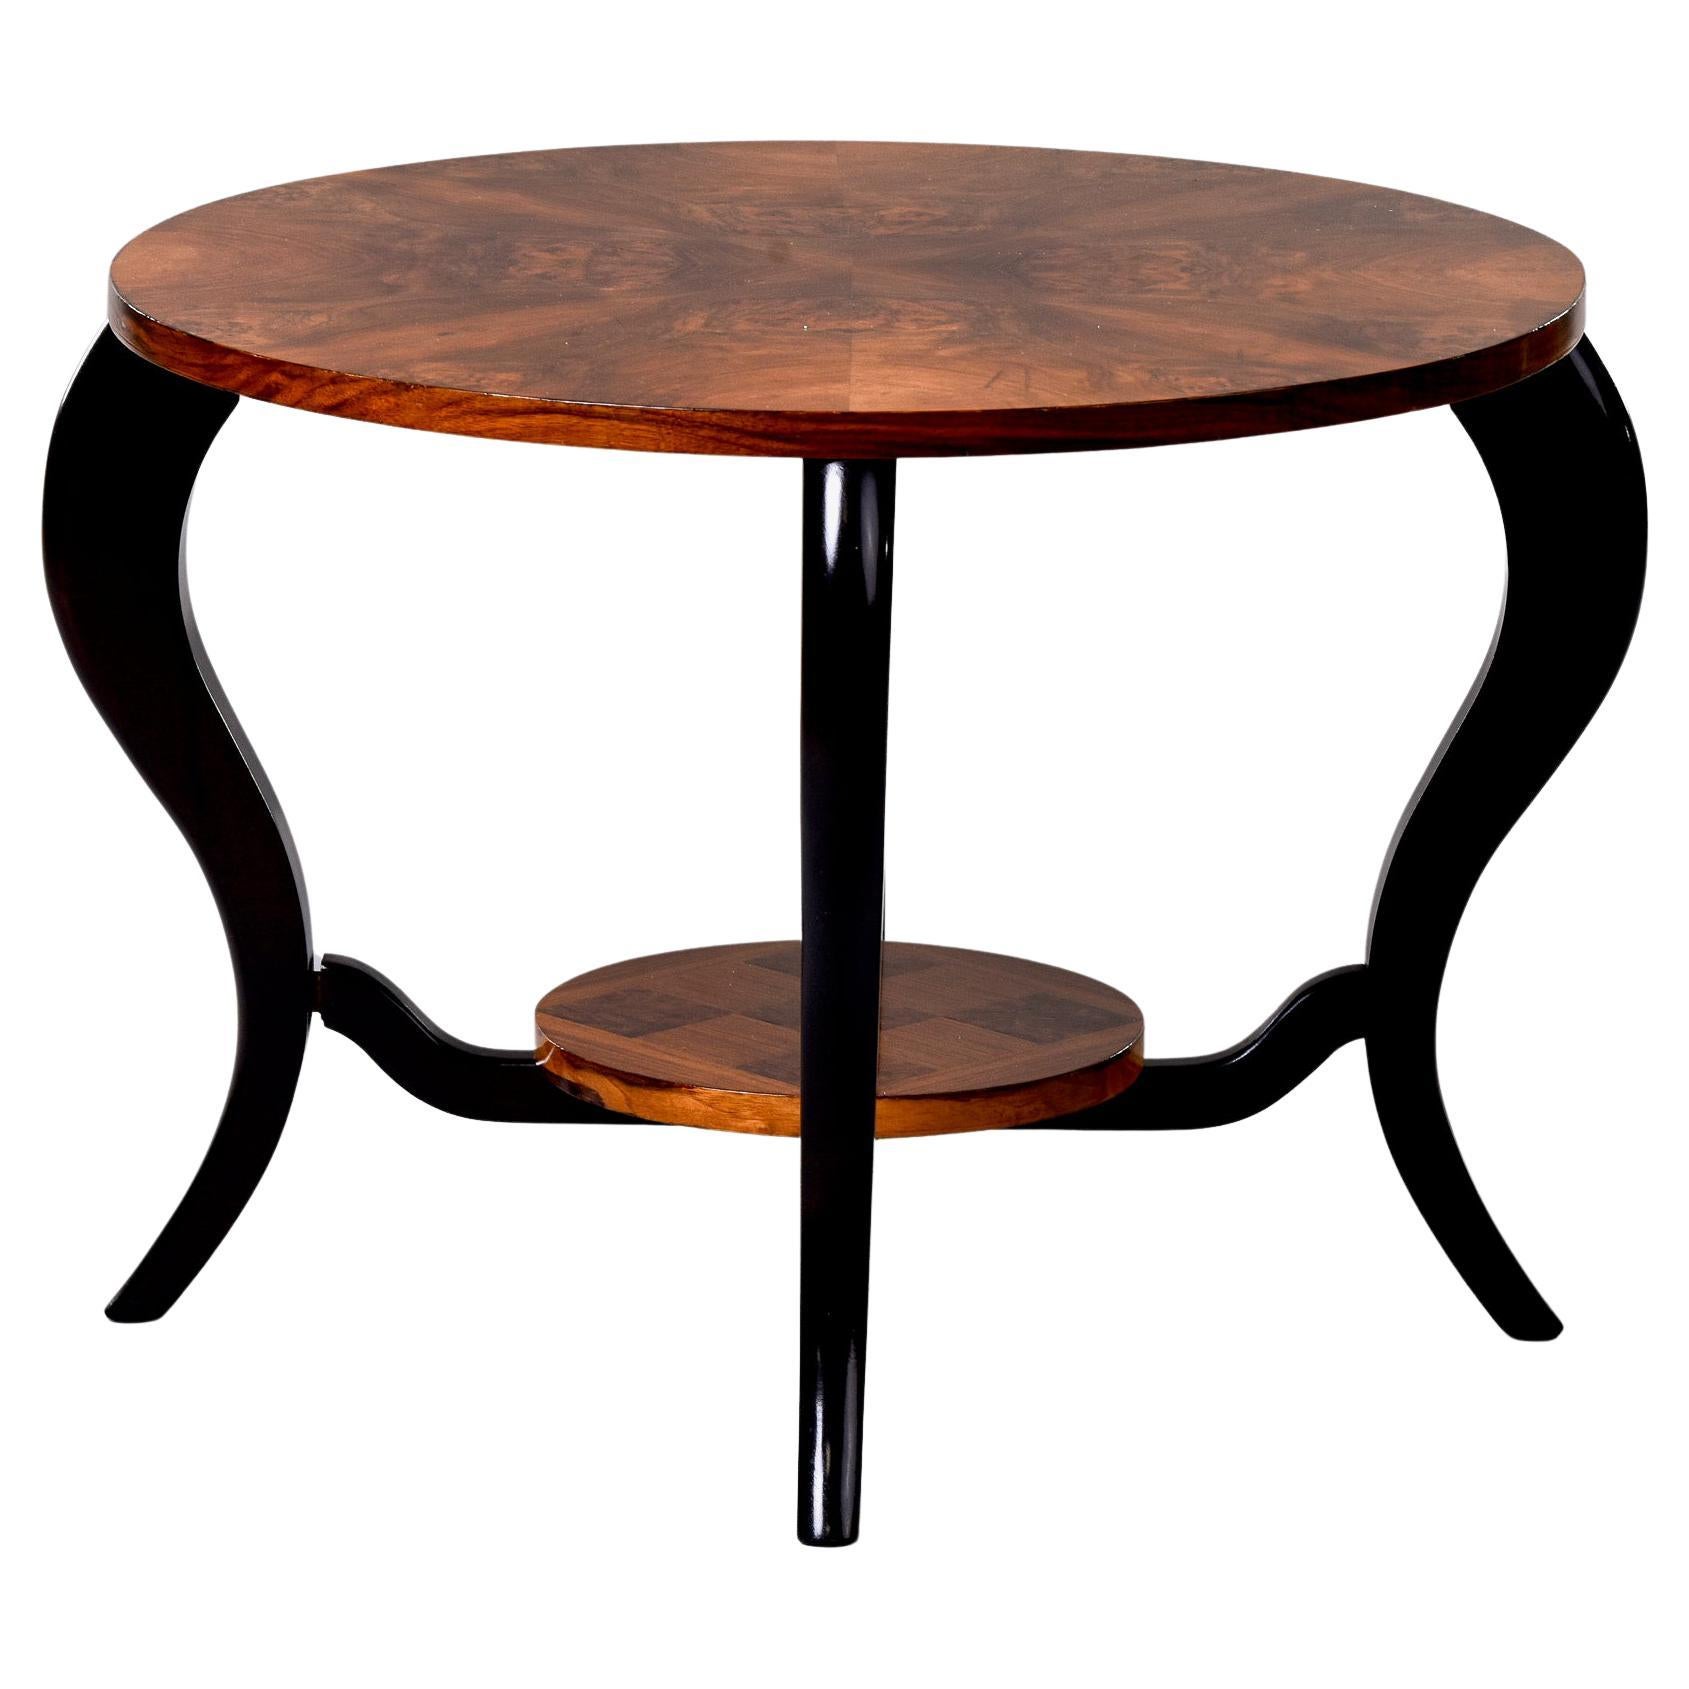 French Art Deco Two Tier Round Burl Wood Table with Black Legs